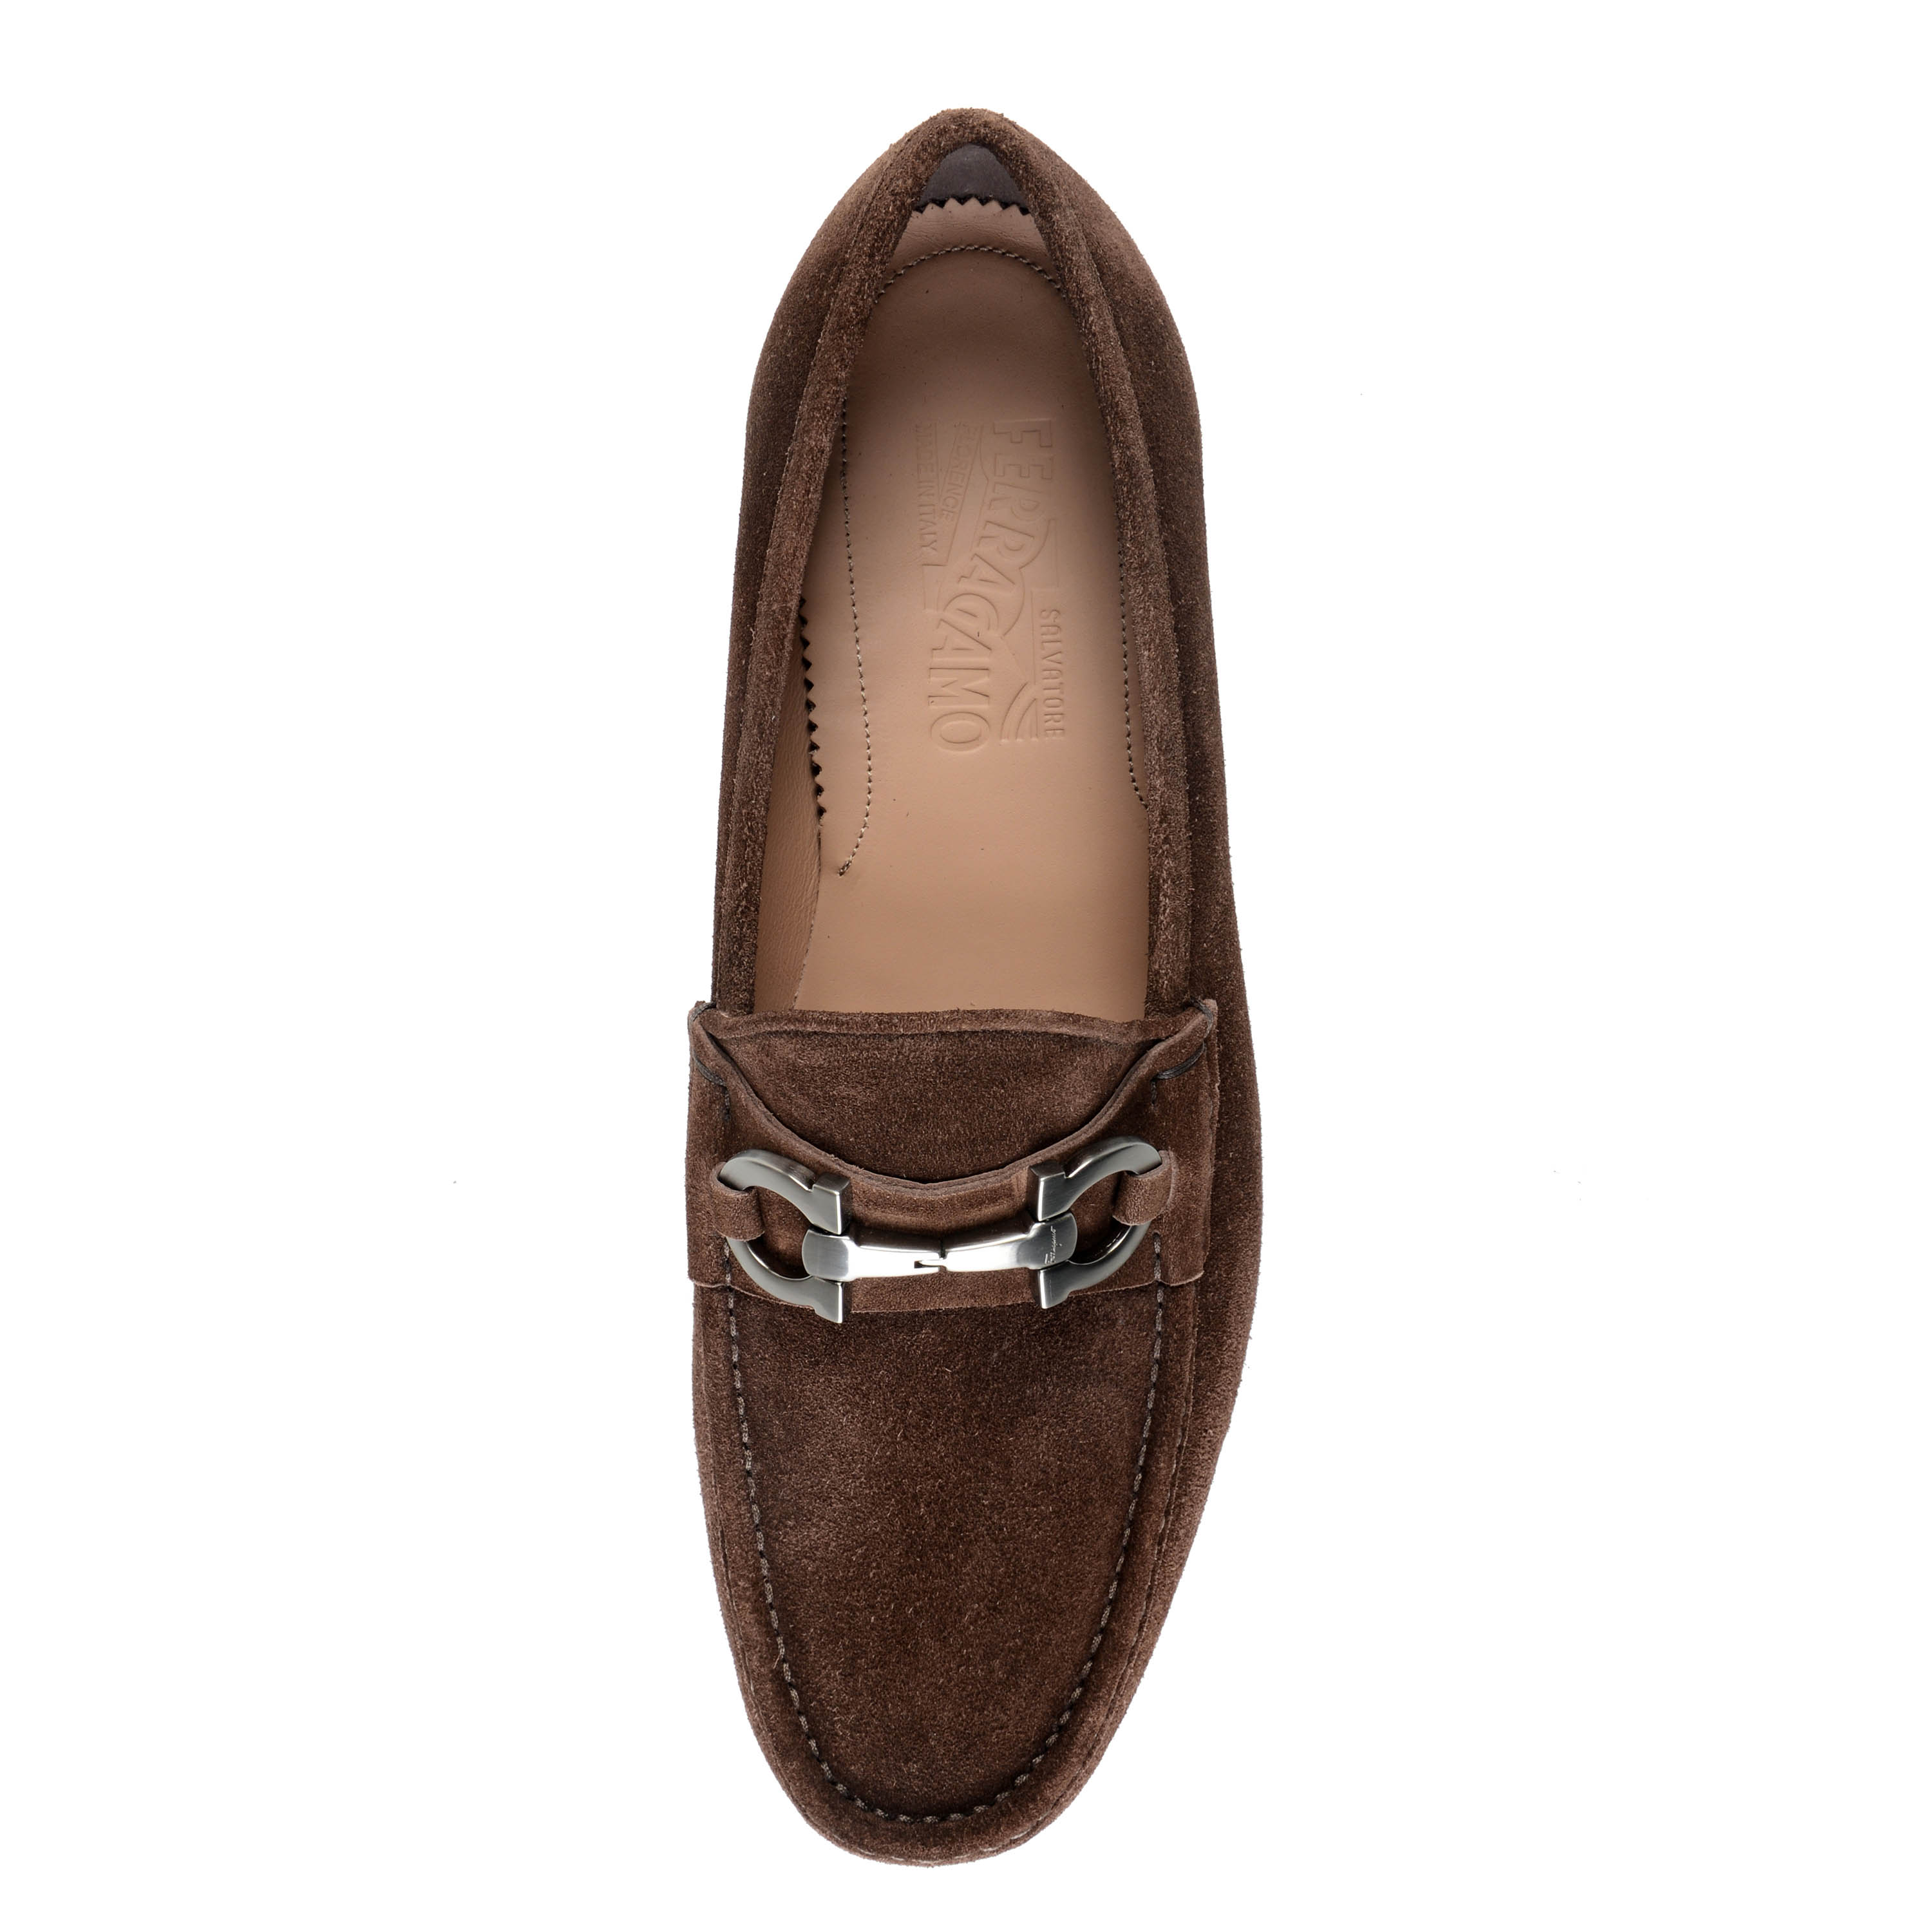 Jolly restaurant Furious Salvatore Ferragamo Men's "Bond" Brown Suede Leather Slip On Loafers Shoes